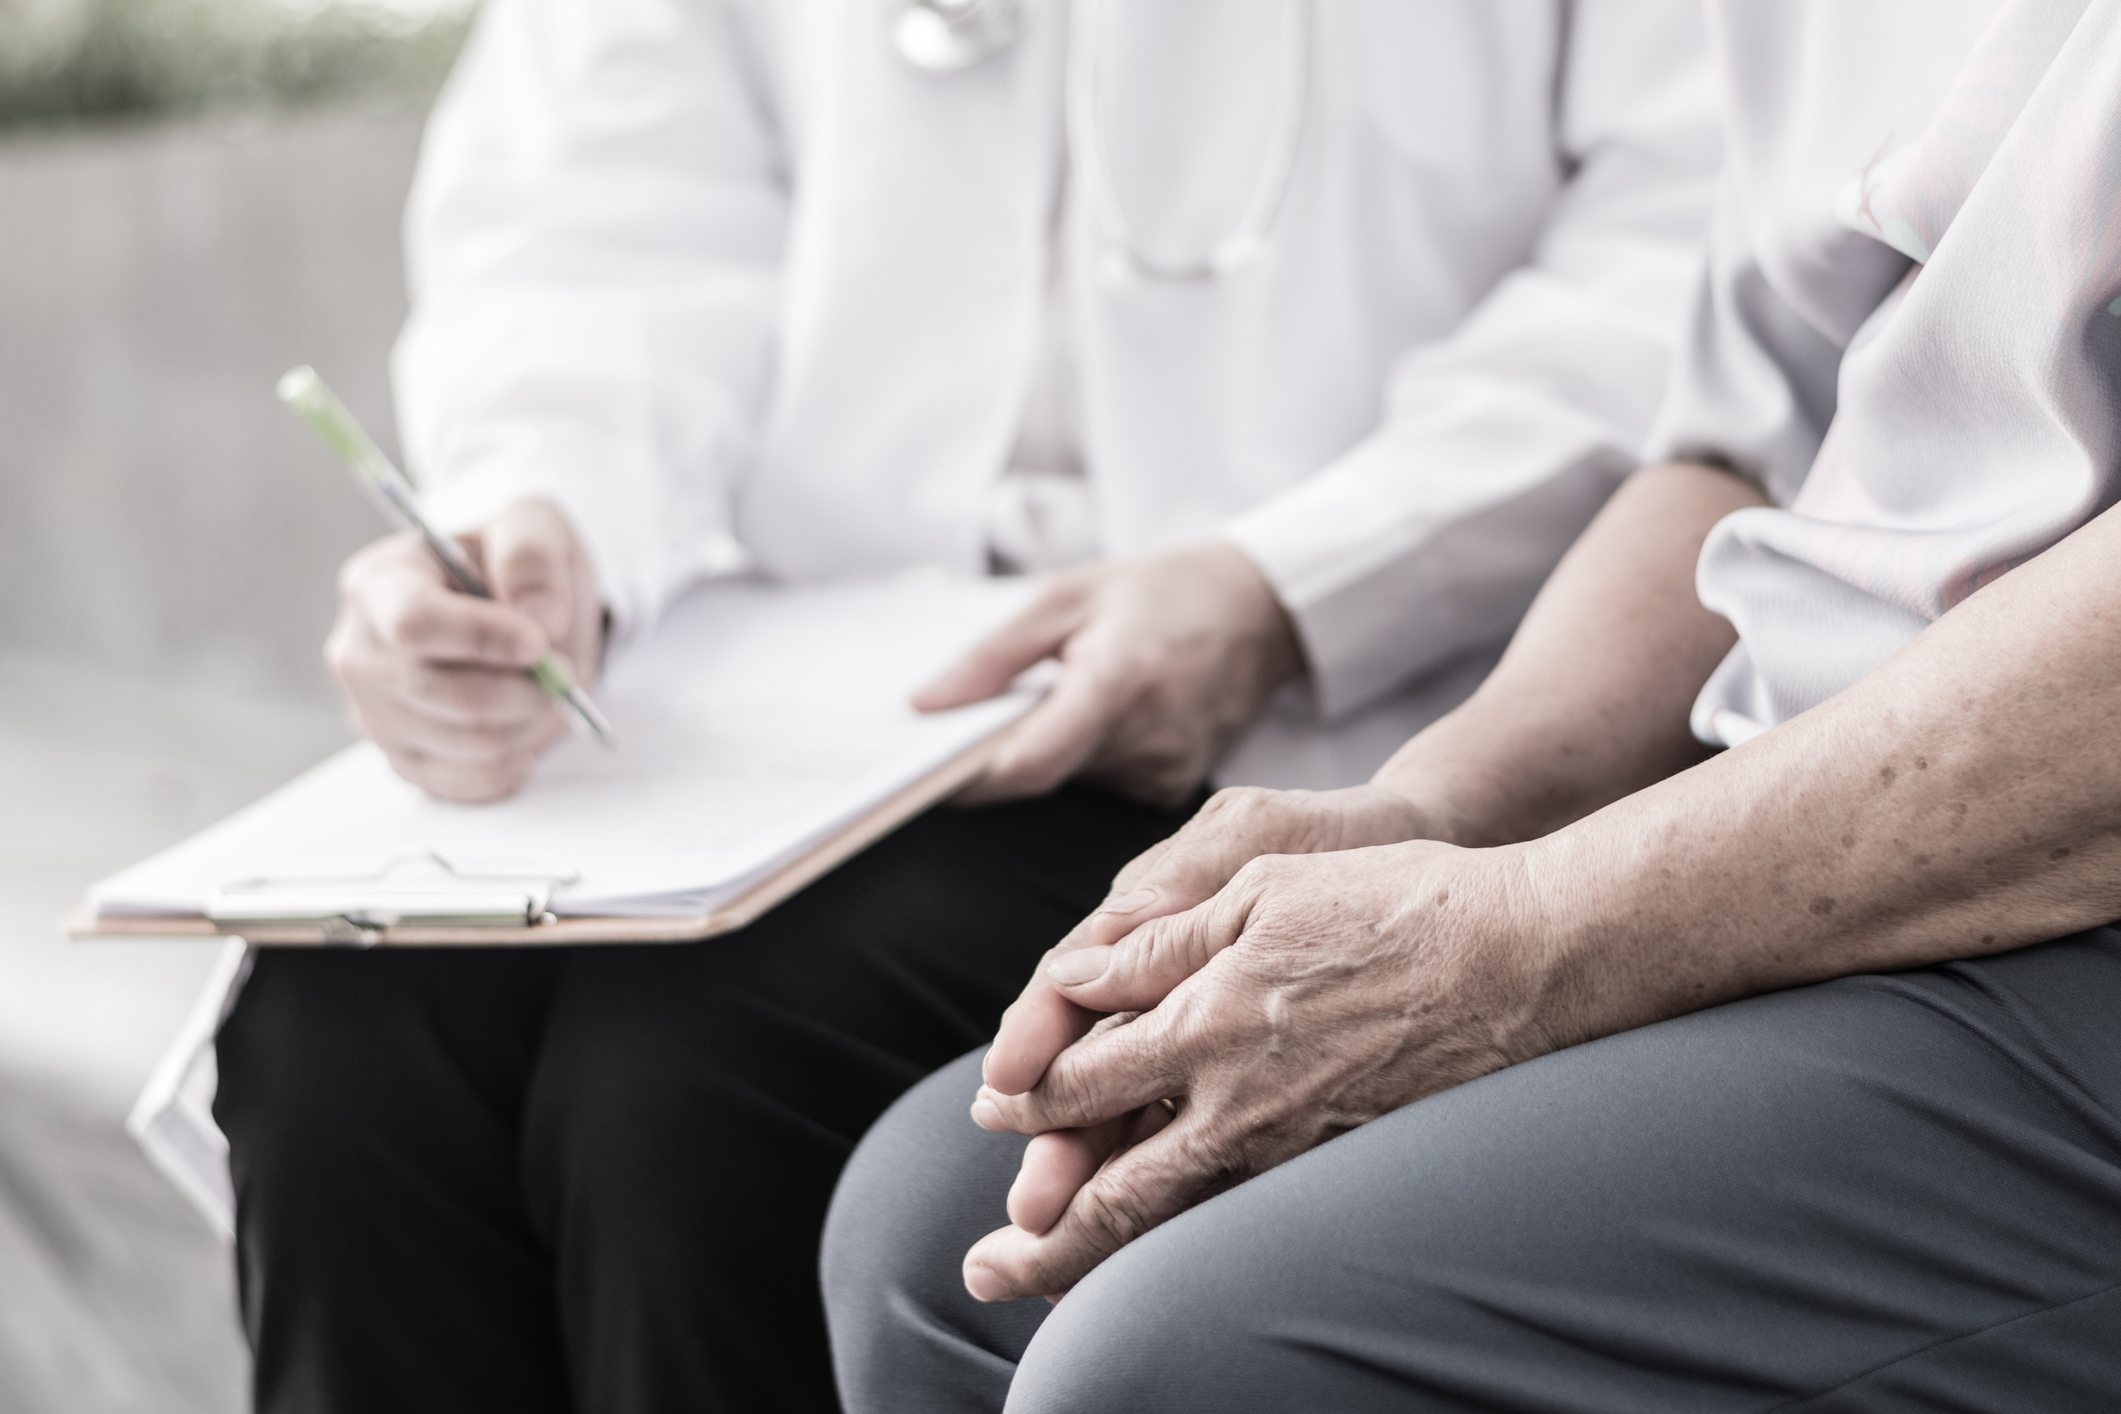 Close-up of elderly patient's hands clasped resting on his legs, with clinician in the background taking notes on a clipboard.